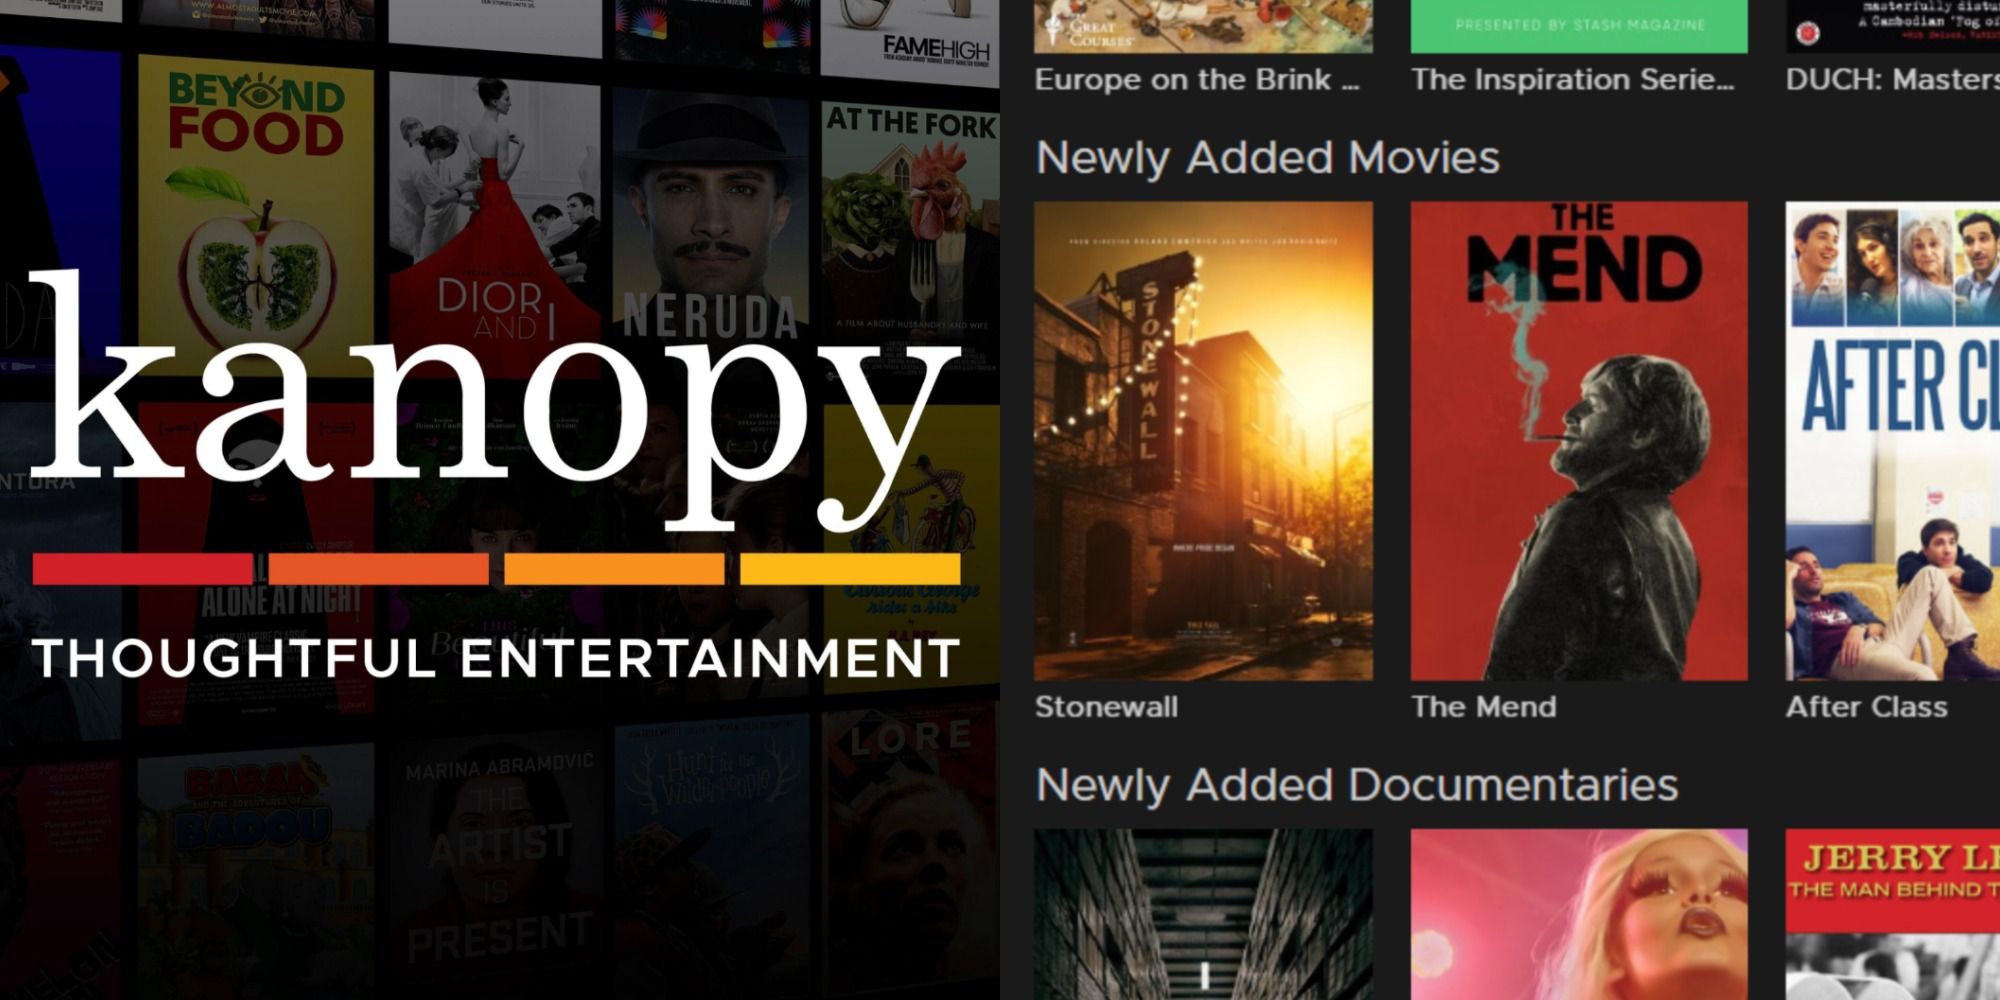 Two side by side images of Kanopy logo and their main search screen